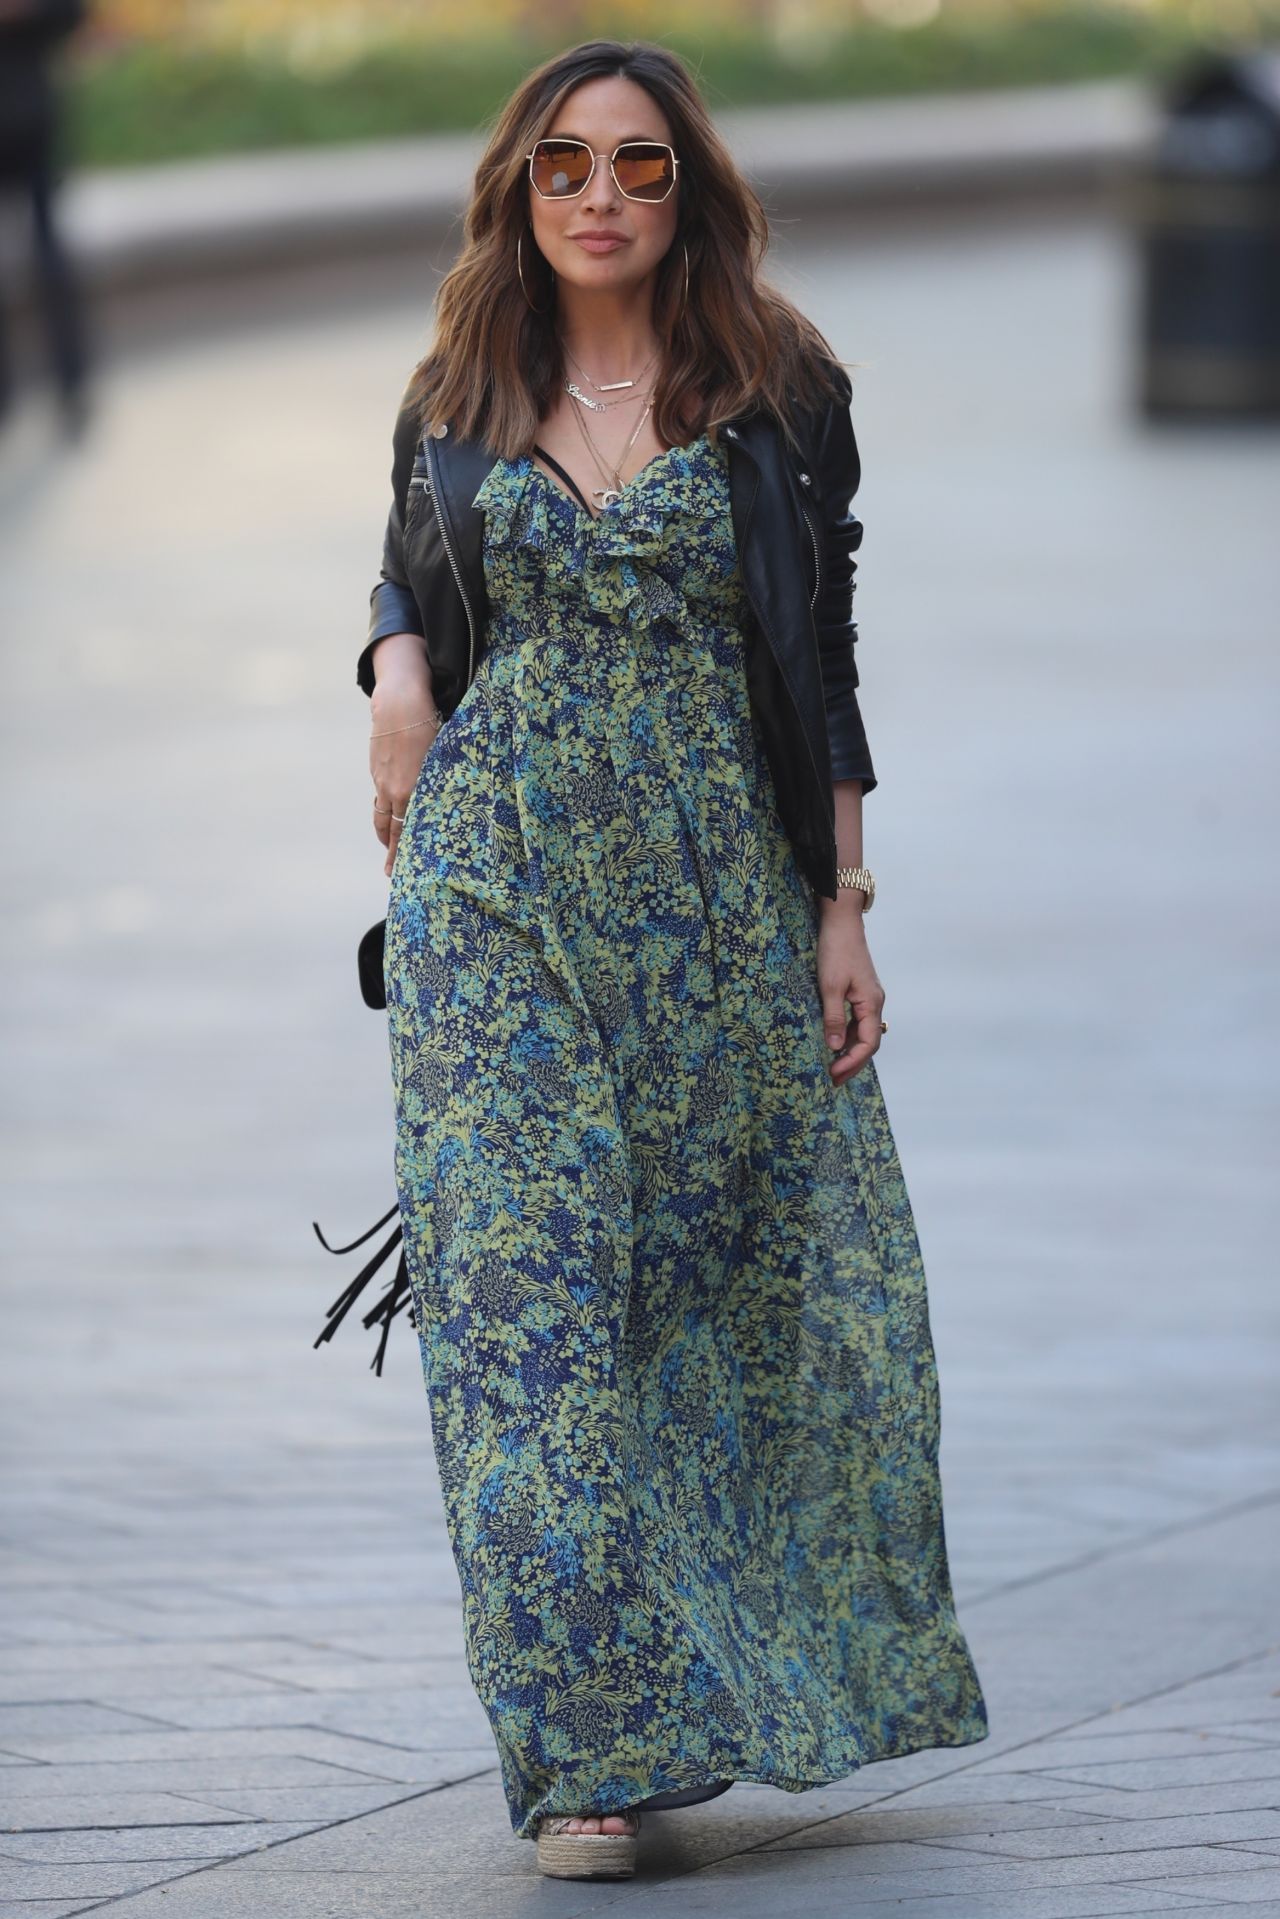 Myleene Klass in Floral Maxi Dress and Black Leather